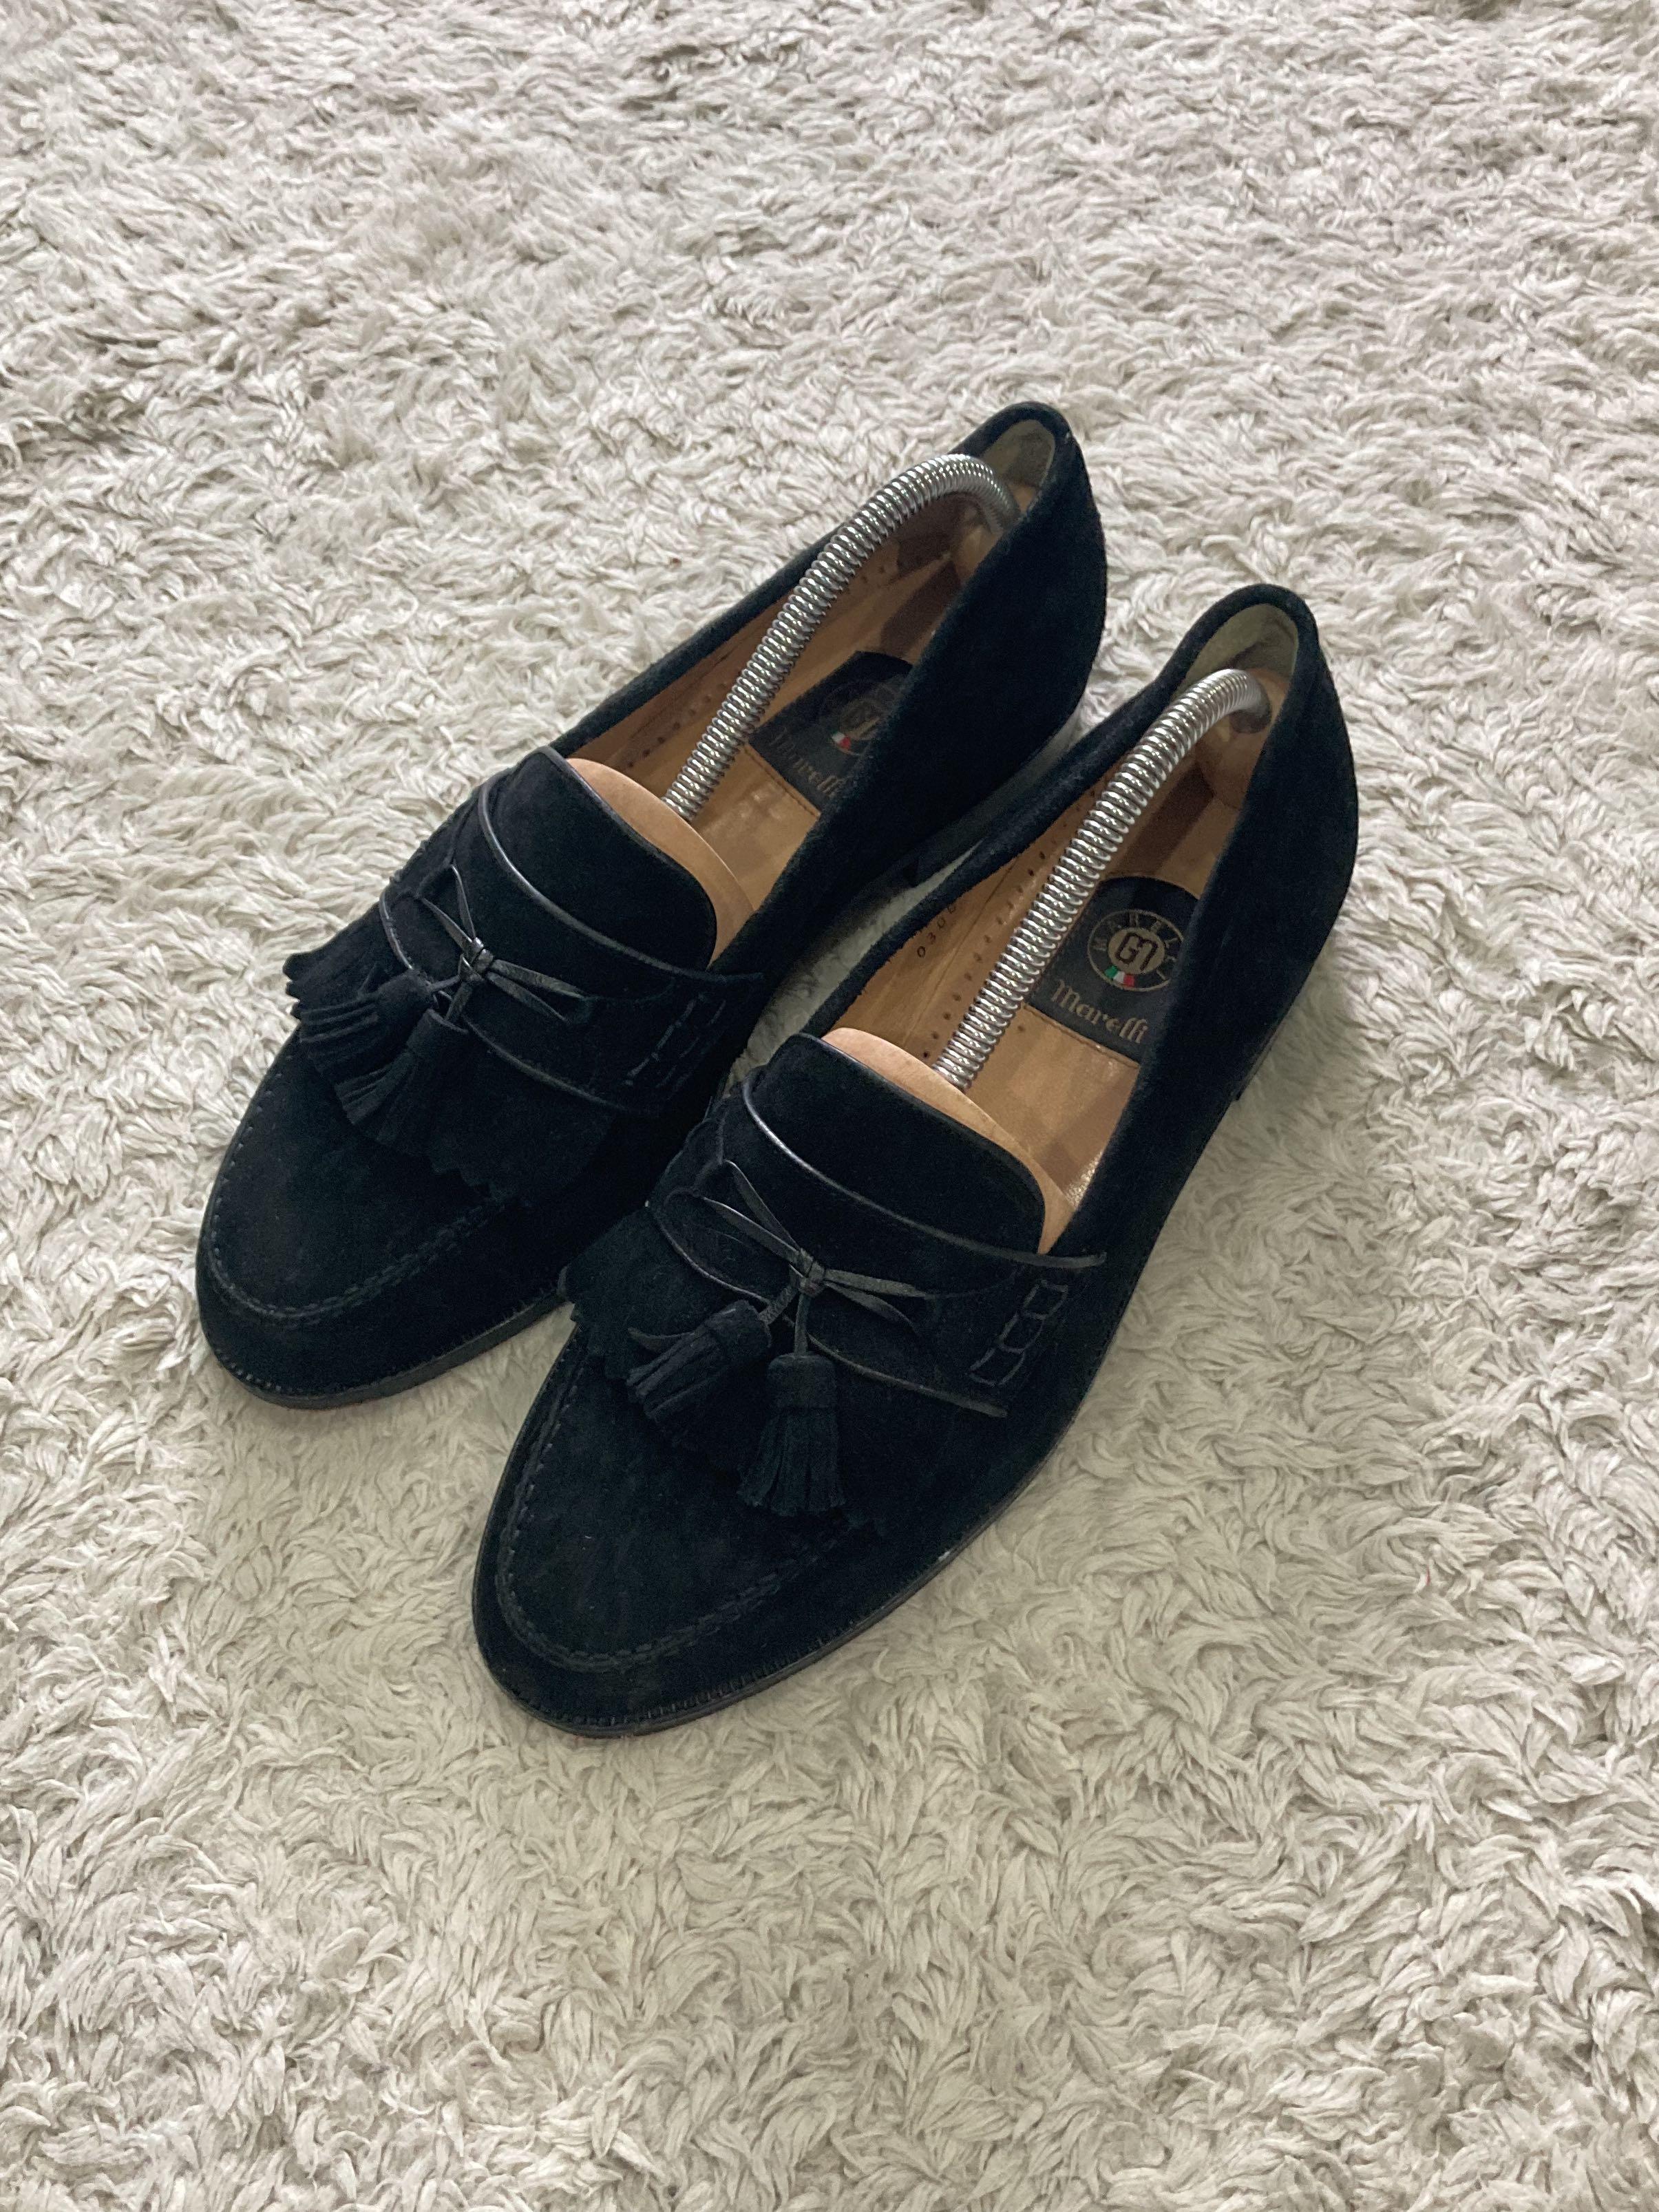 Marelli “ Italy brand “ Loafer Shoes, Men's Fashion, Footwear, Dress shoes  on Carousell